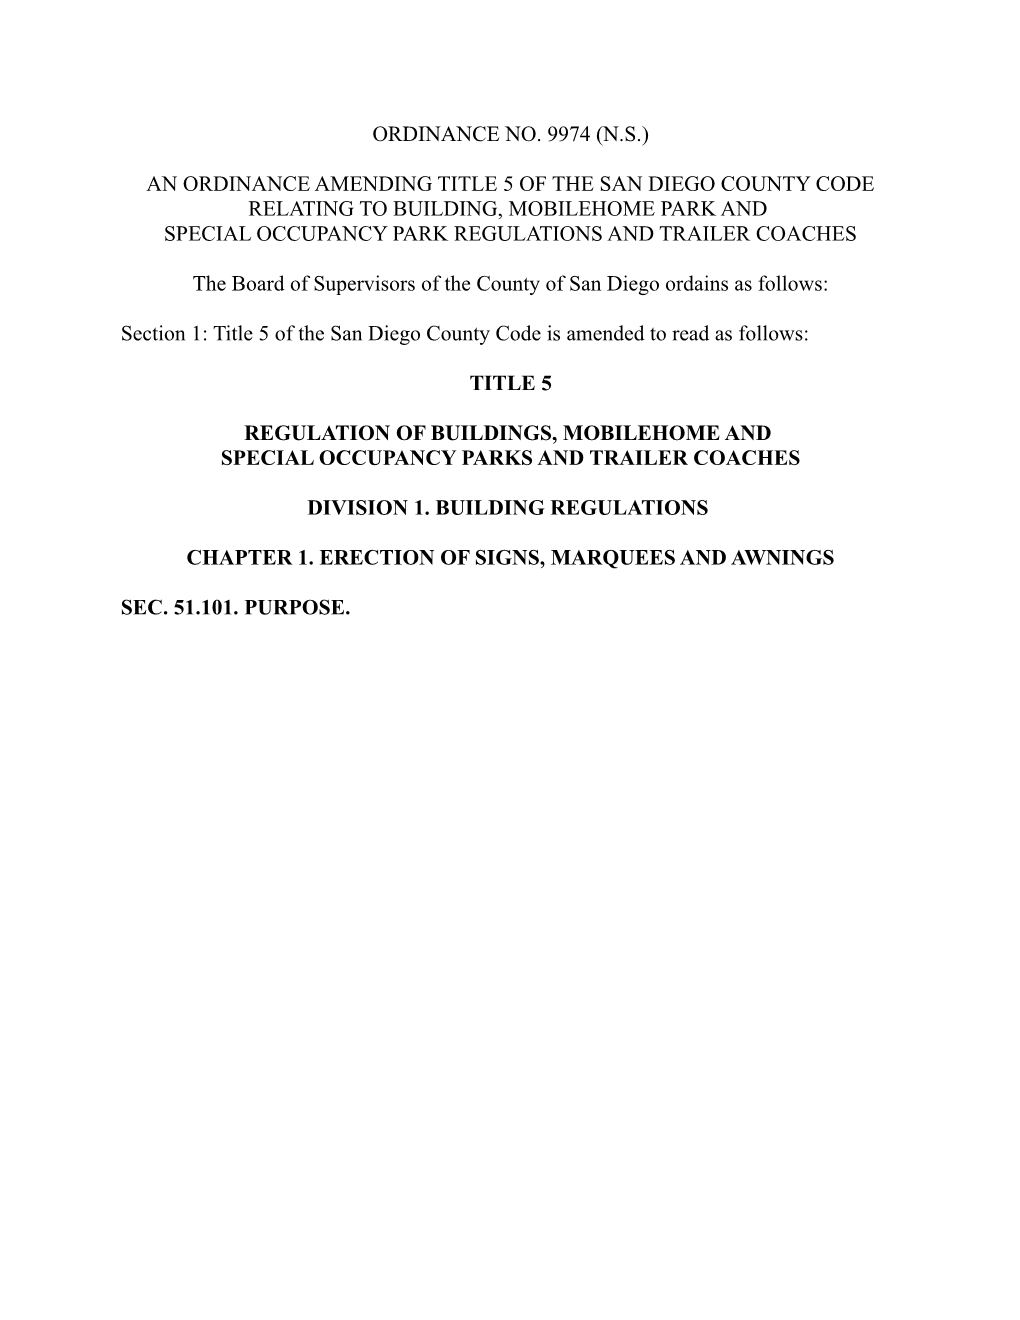 An Ordinance Amending Title 5 of the San Diego County Code